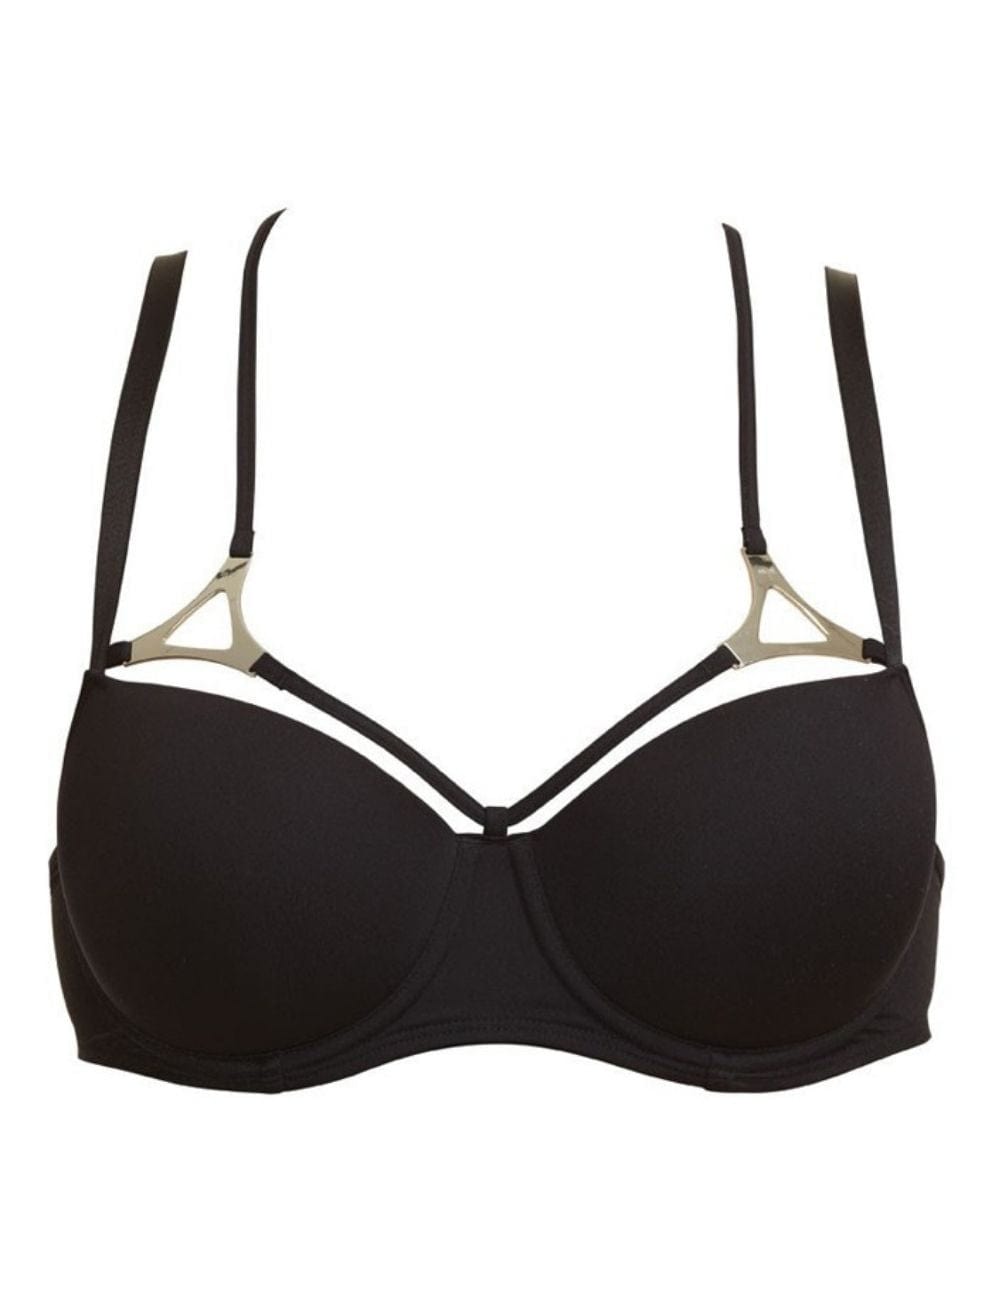 Discover the story behind the Marlies Dekkers care bra